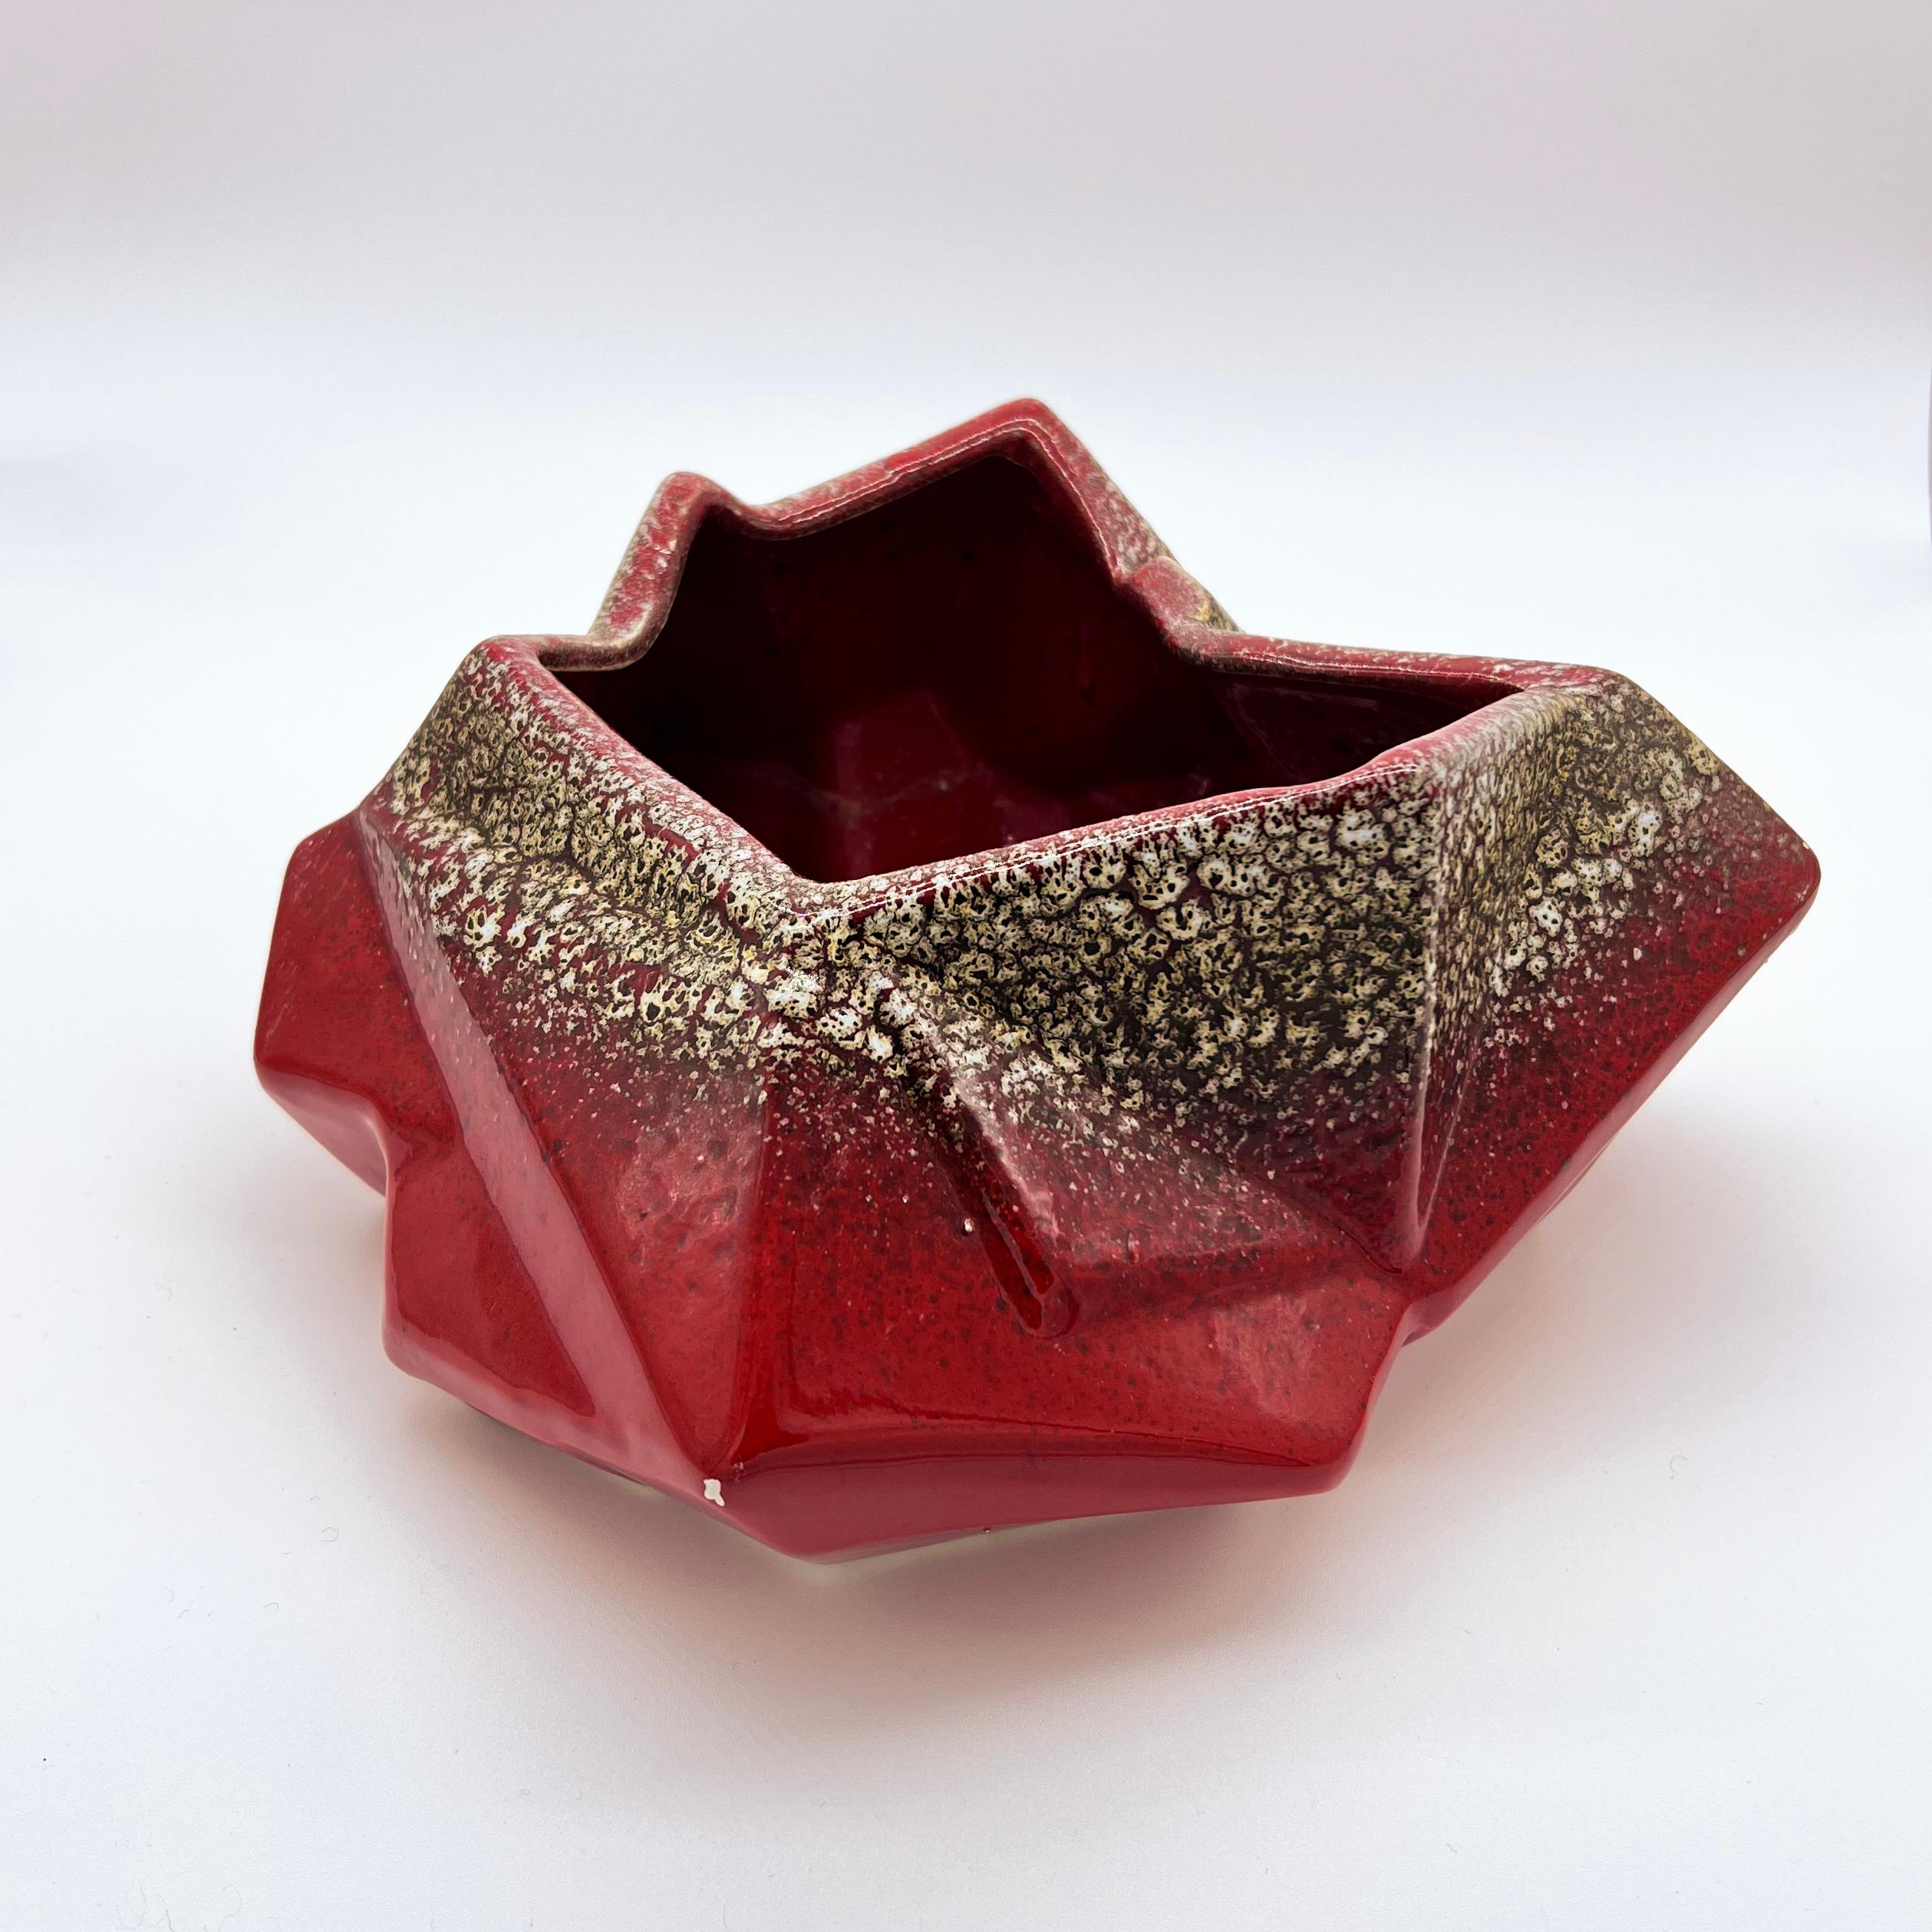 Vintage red ceramic bowl - valet tray, made in Italy in the 1970s with an abstract geometric shape. Hand painted, with a deep red base layer and a series of decorative 